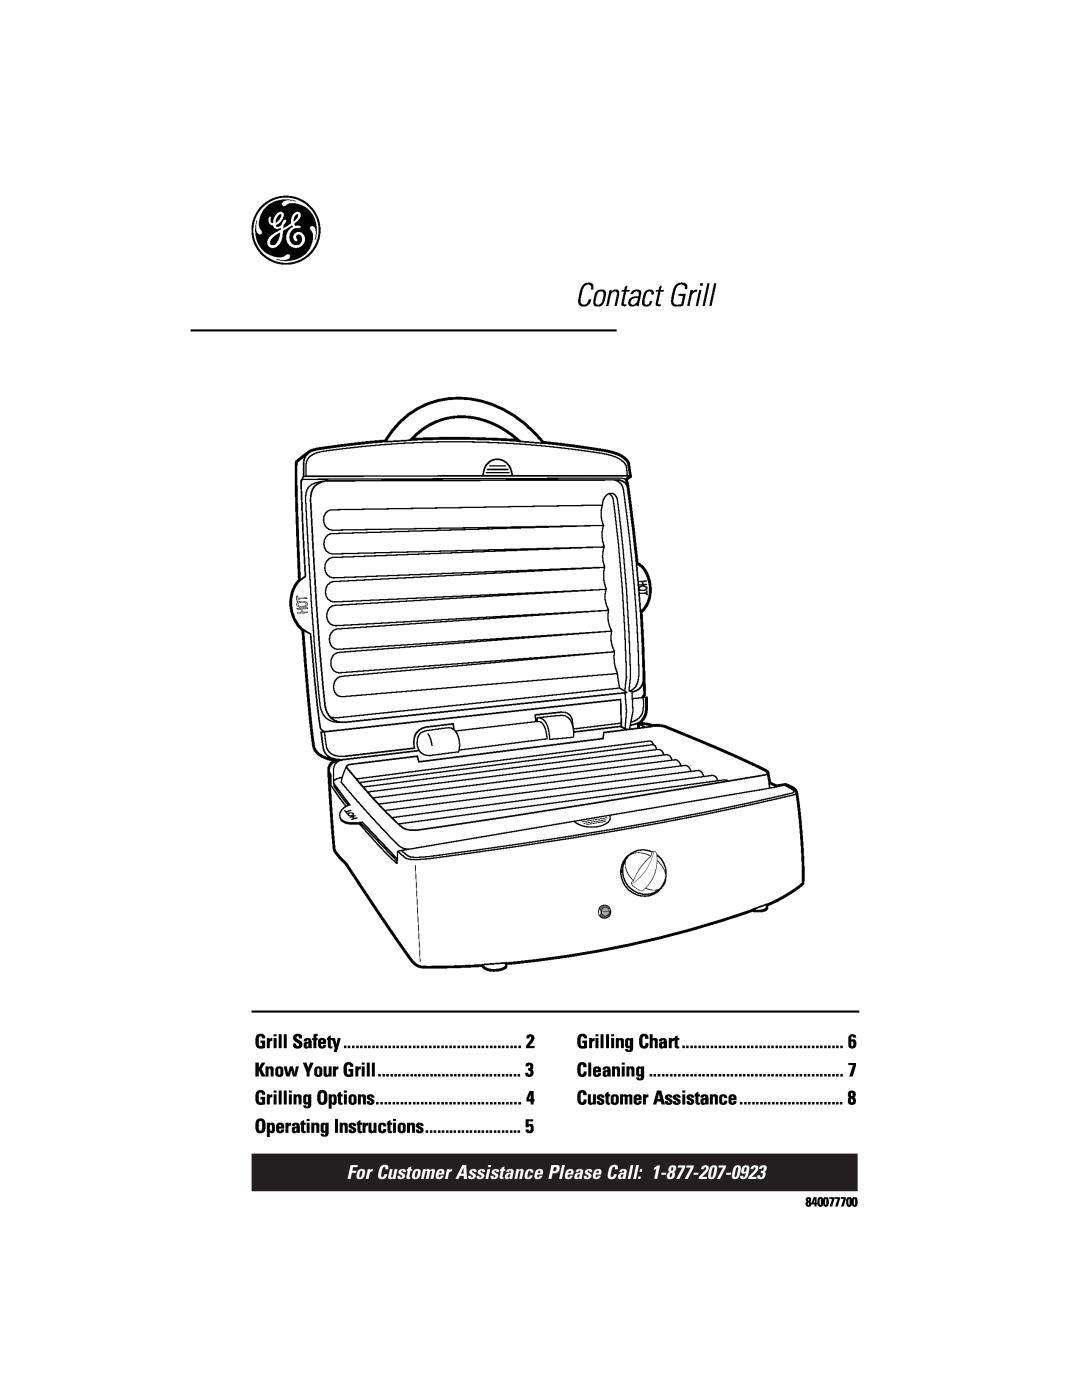 GE 106642 operating instructions Contact Grill, For Customer Assistance Please Call, Grill Safety, Grilling Chart 